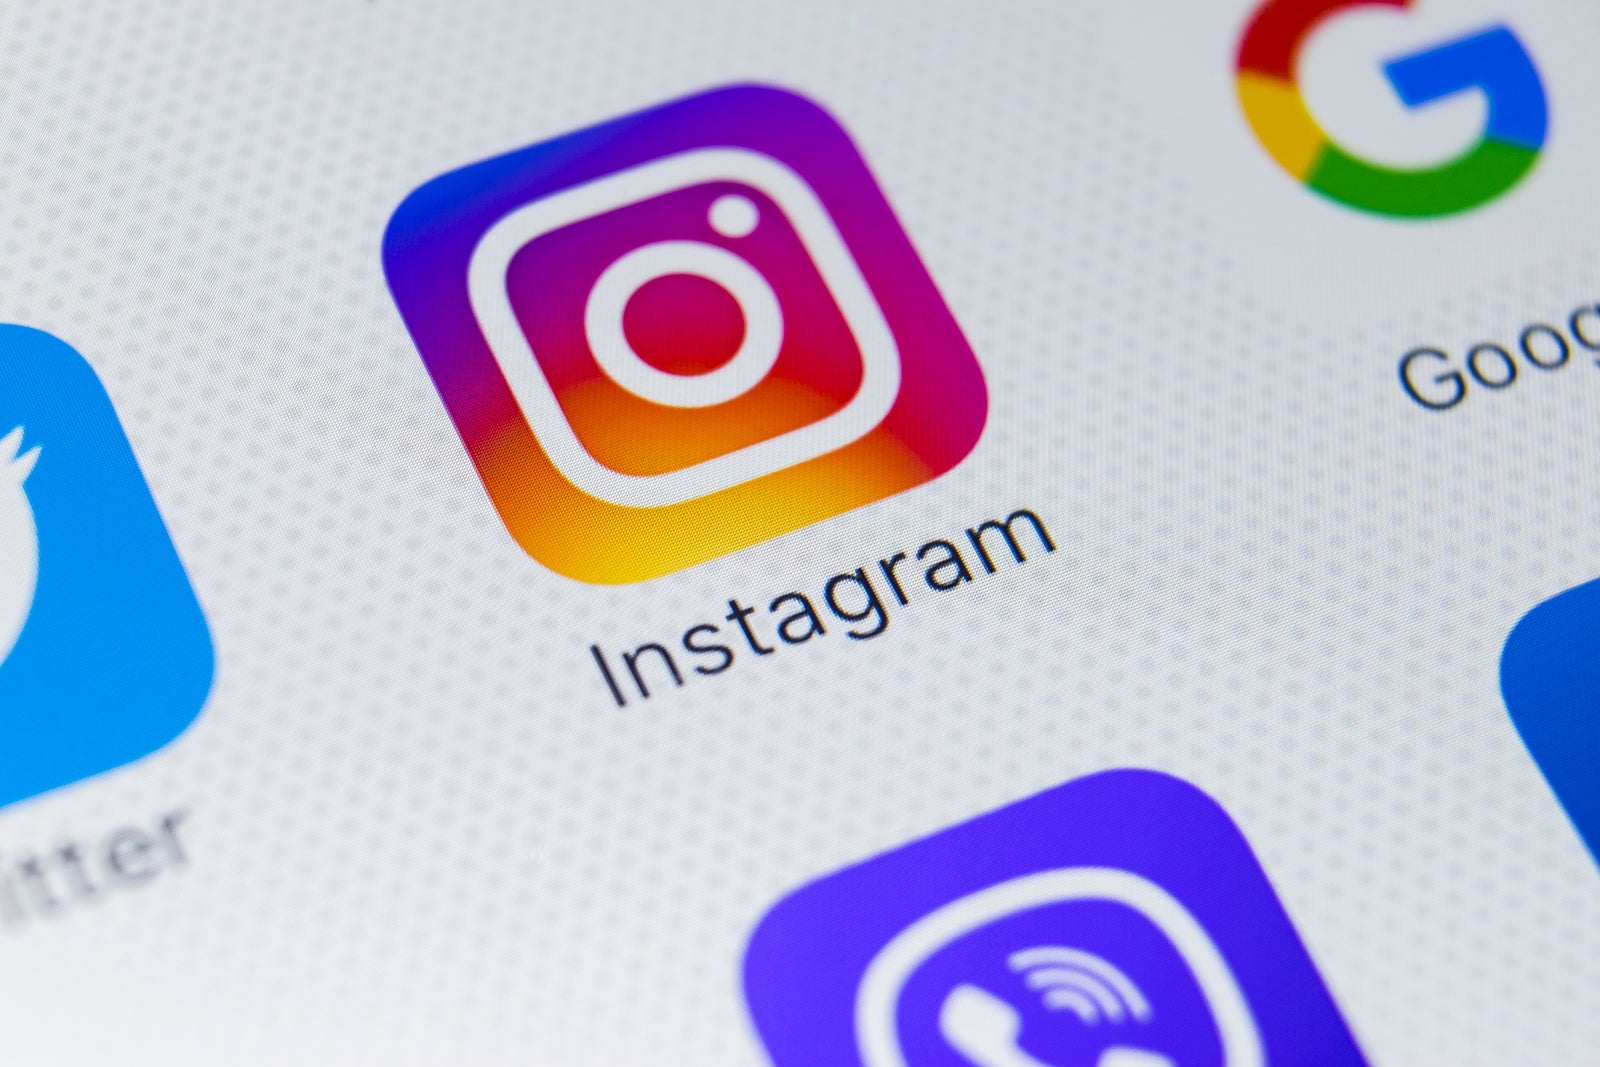 Sankt-Petersburg, Russia, January 31, 2018: Instagram application icon on Apple iPhone 8 smartphone screen close-up. Instagram app icon. Instagram is an online social networking service .